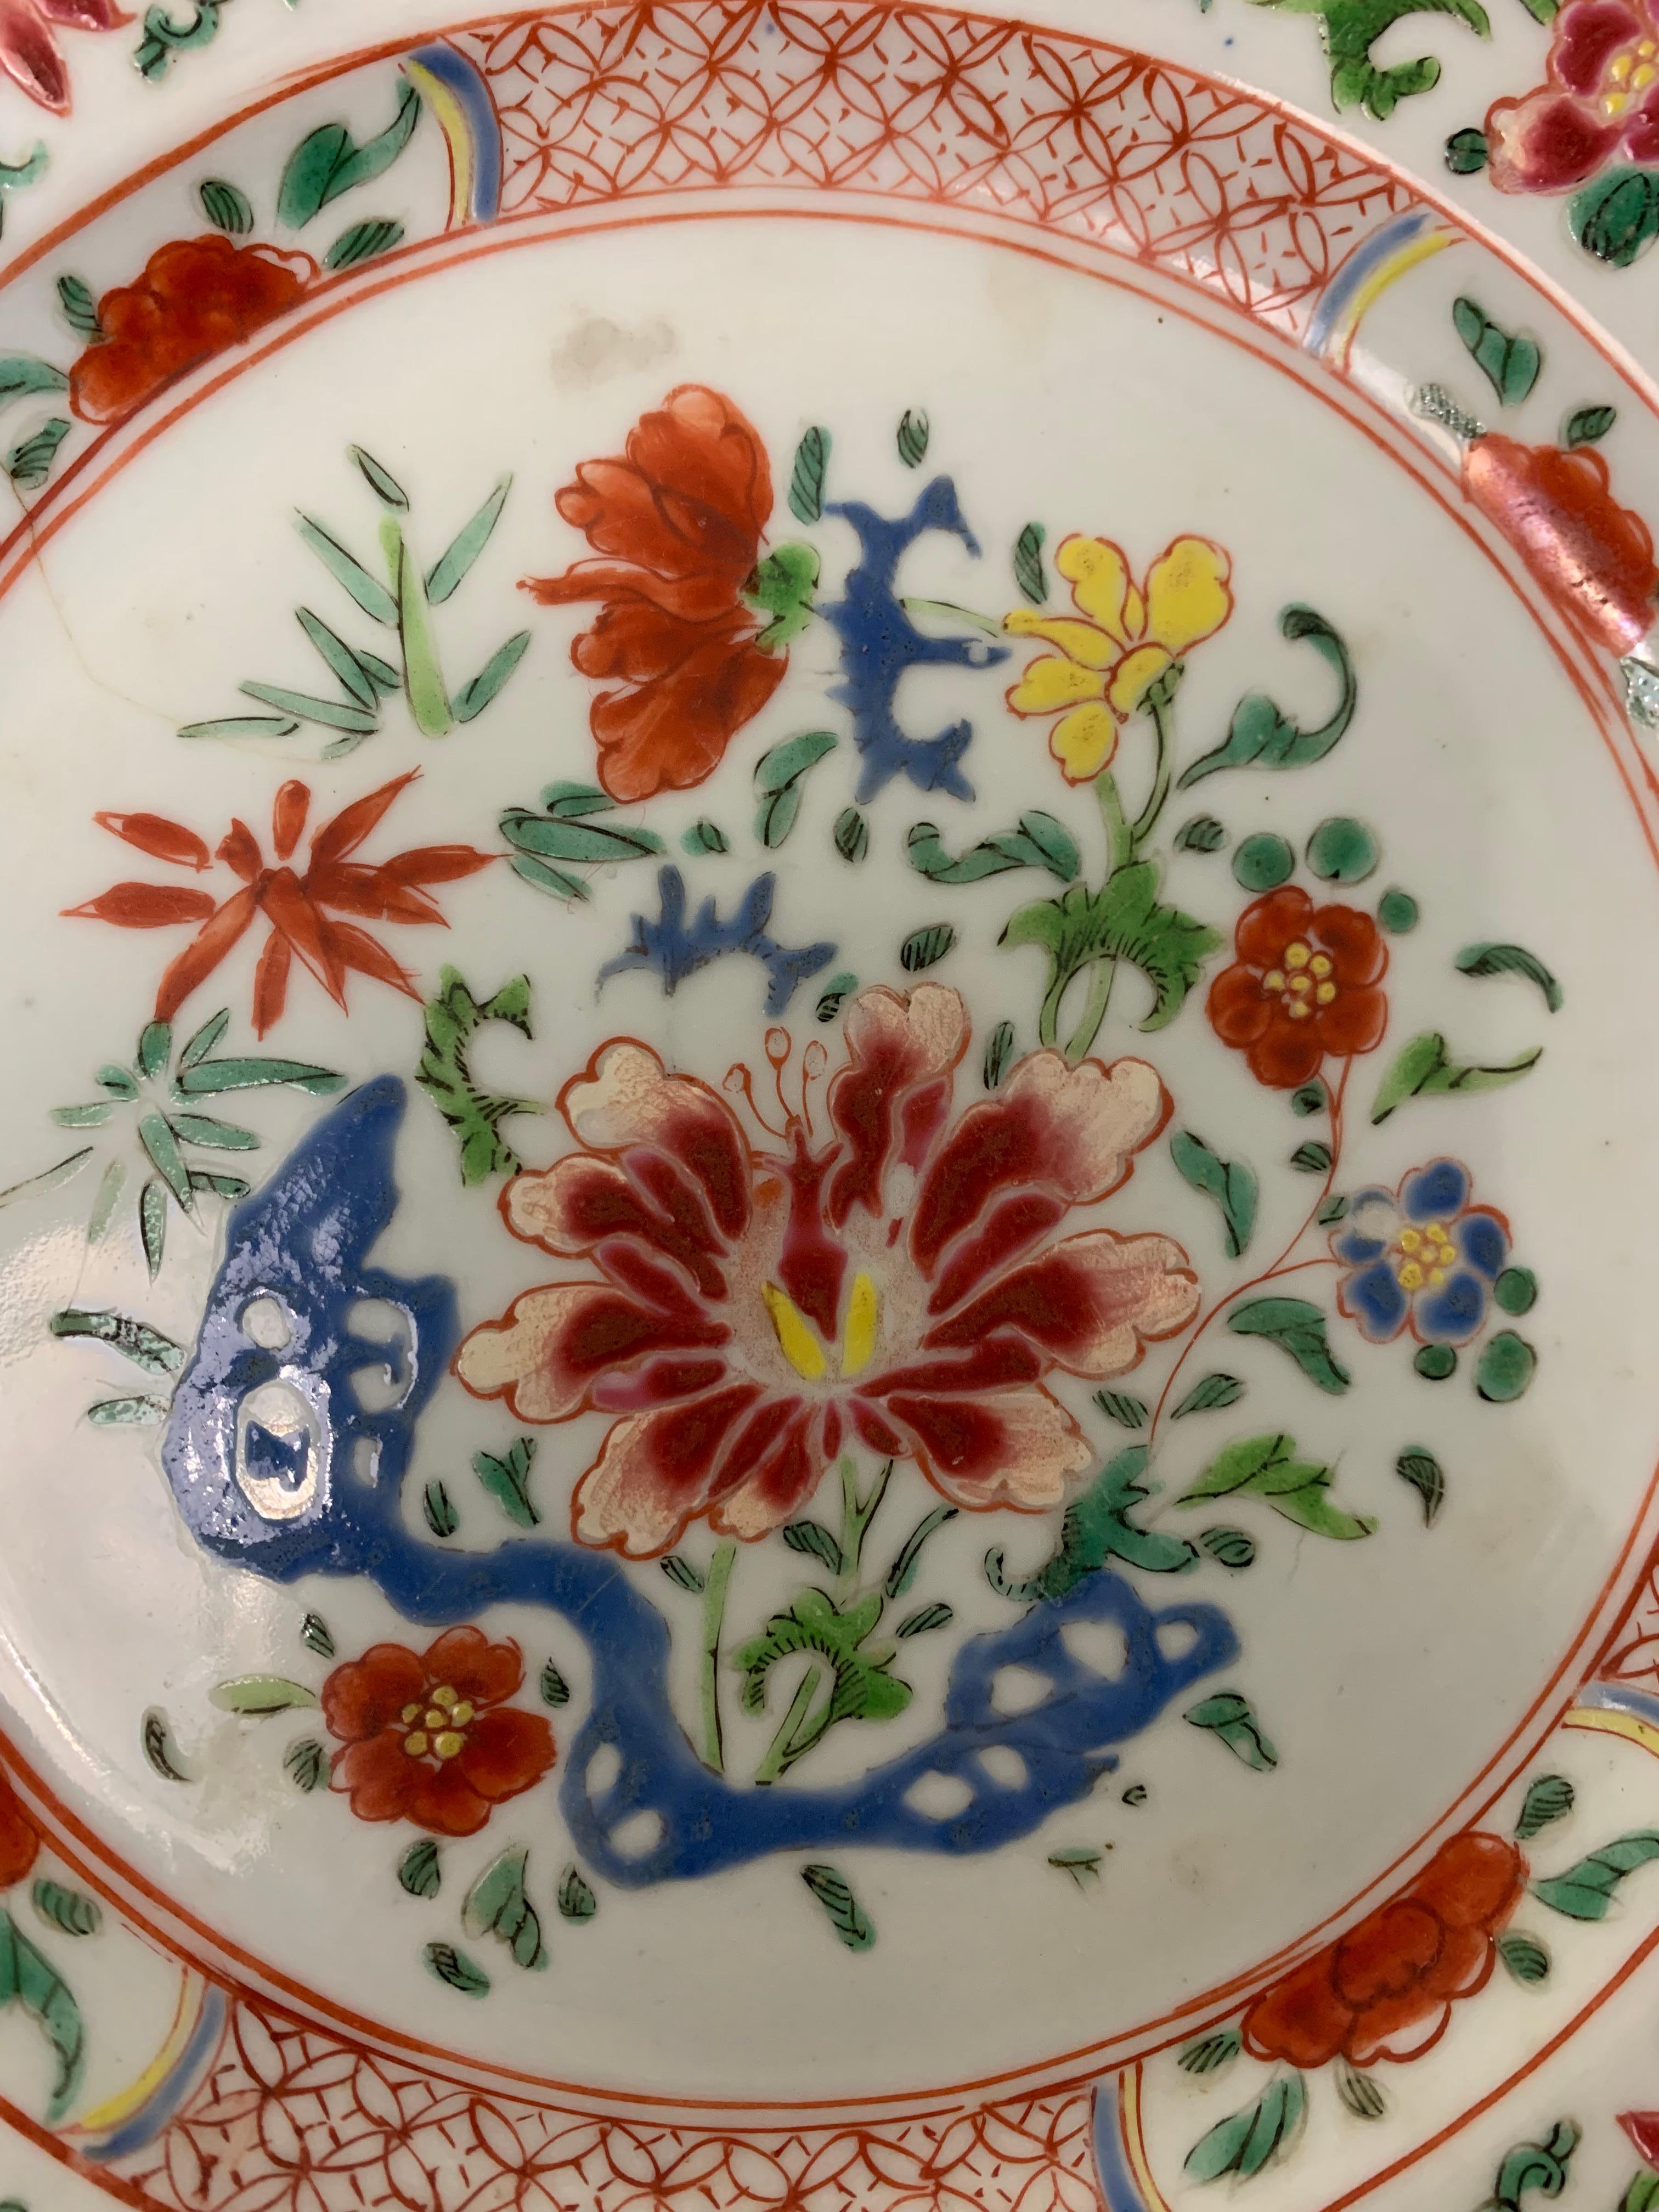 Charming Chinese plate of the pink family, dating from the 18th century. It has a polychrome decoration with floral and vegetal motifs. The dominant colours are pink and red, but other colours such as blue and green are also used. The different